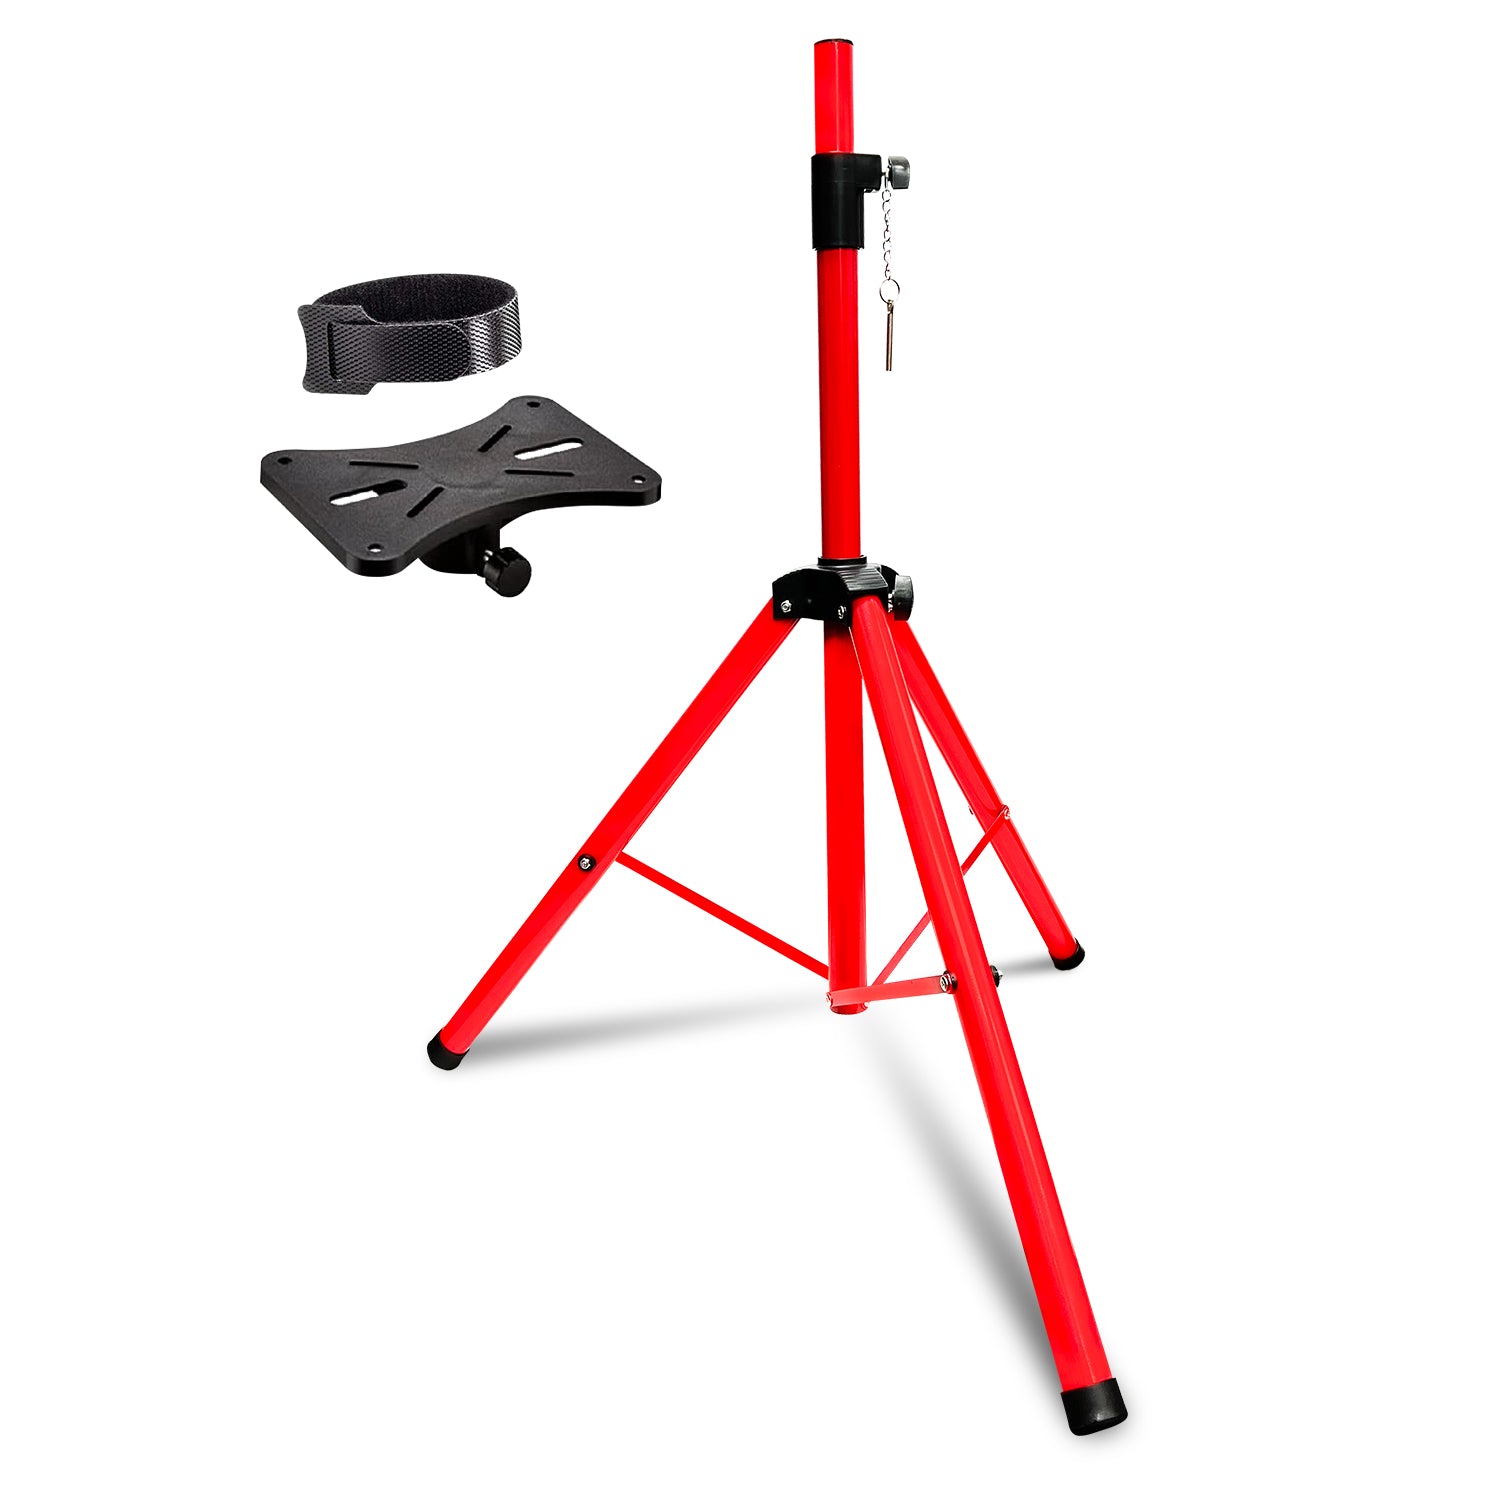 5 Core PA Speaker Stands Short Height Adjustable Professional DJ Tripod with Mounting Bracket, Extend from 40 to 72 inches, Red SS ECO 1PK RED WoB